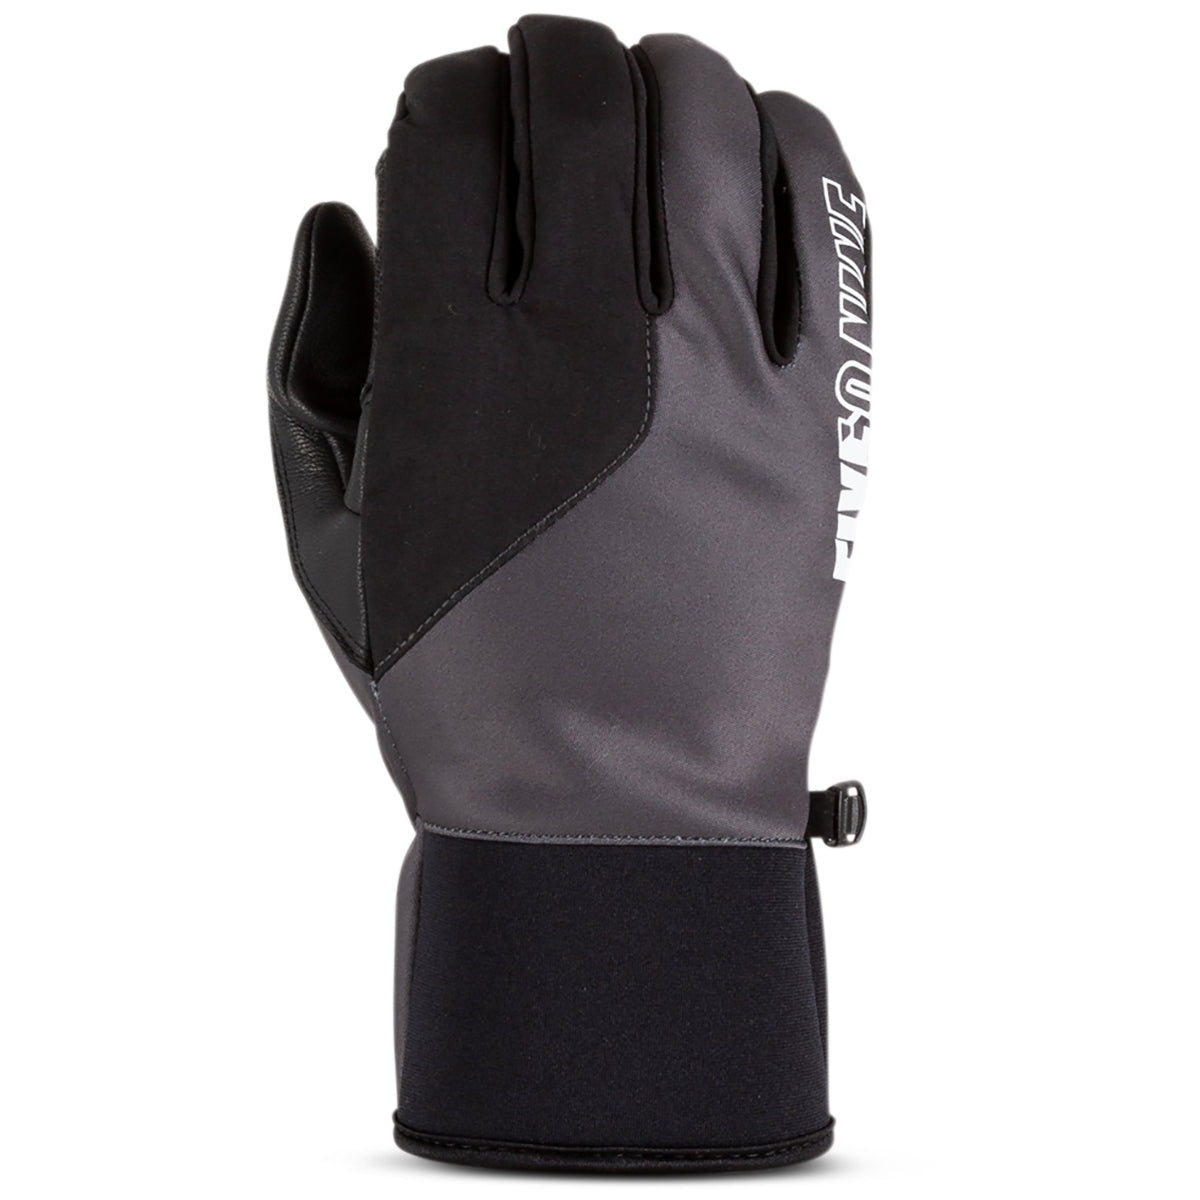 509, Ride 509, Snow Gloves, Men's Snow Gloves, Gloves, Snow Gear, Snowmobile Gloves, Windproof Gloves, Factor Pro Gloves, F07001200